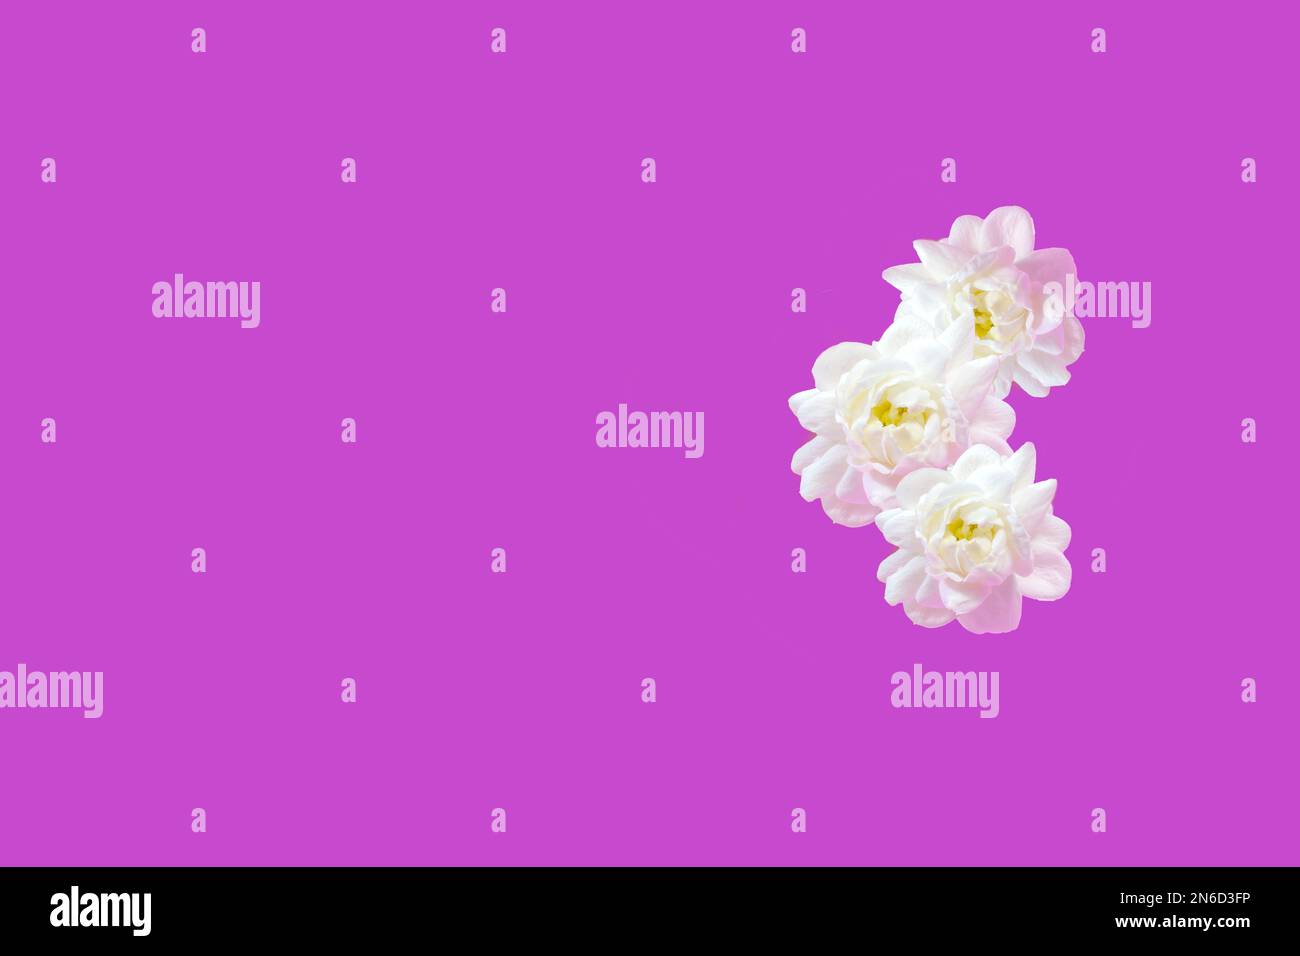 Blossom jasmine flowers isolated on a pink background for valentines day. Stock Photo